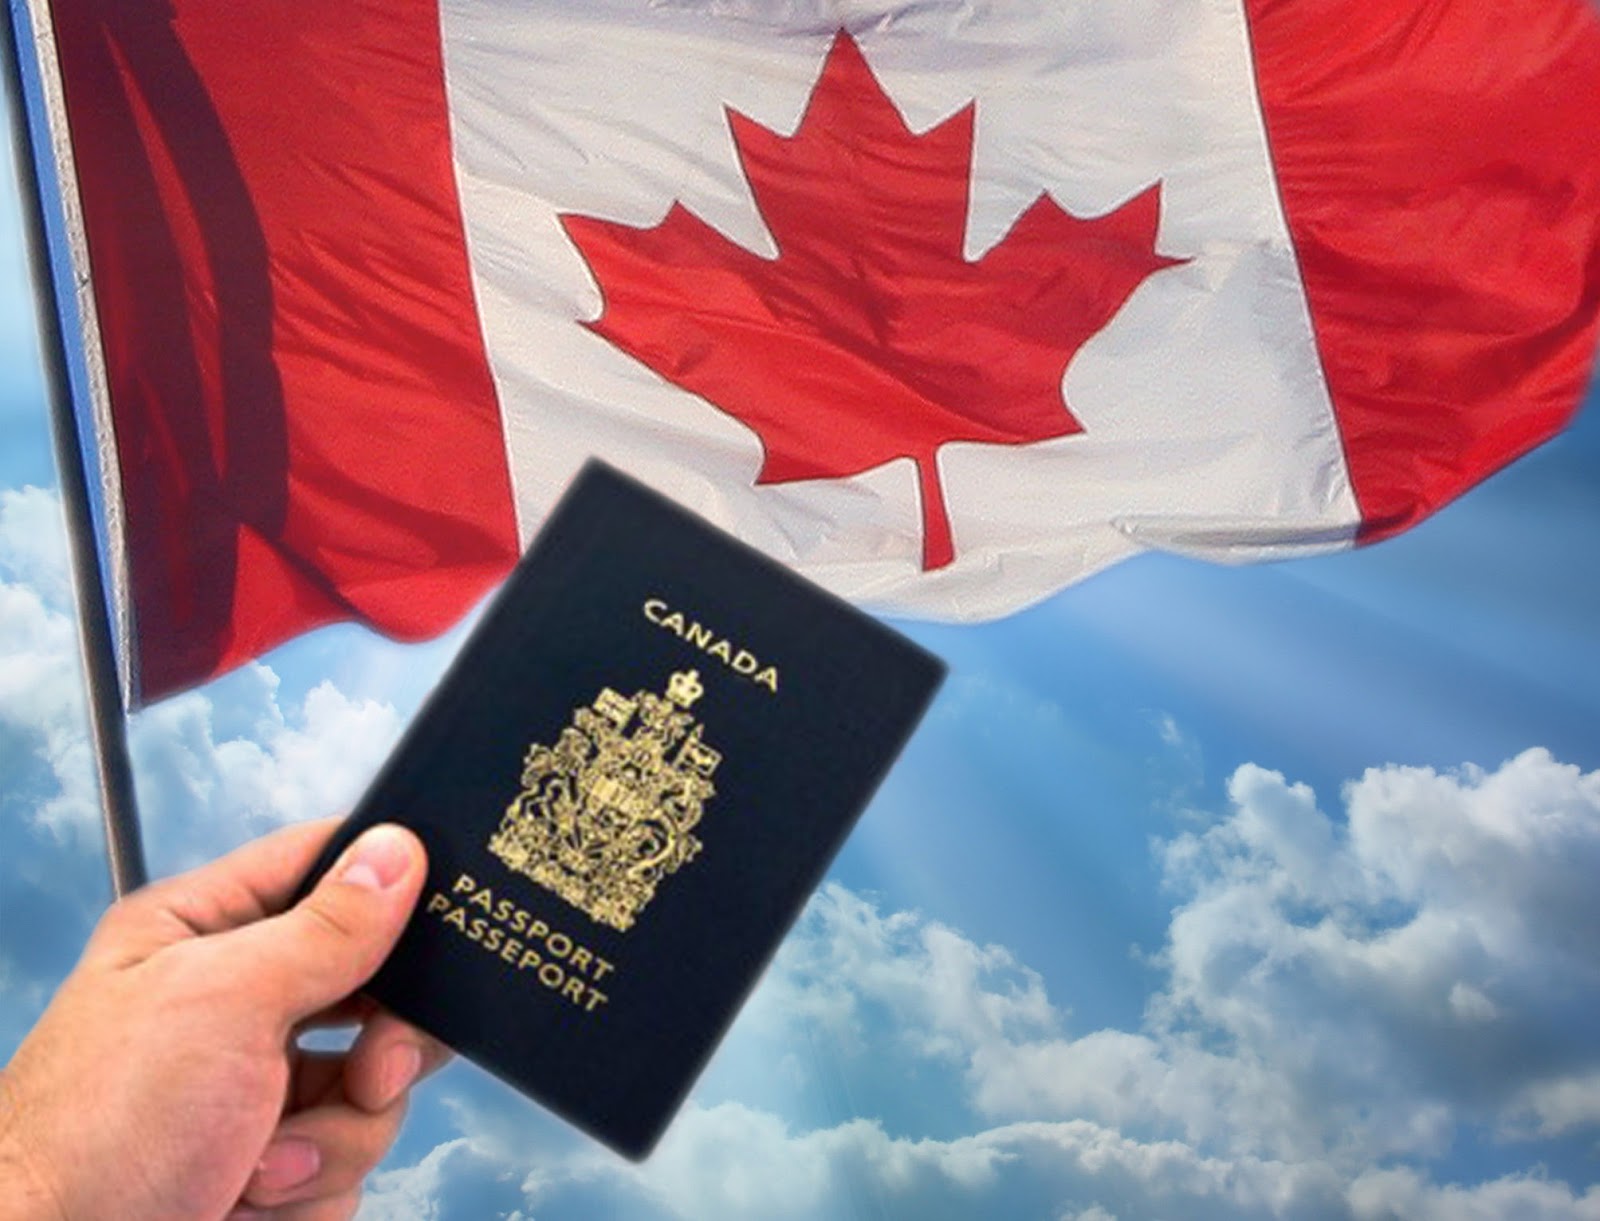 Applying for a student visa to Canada has never been easier.